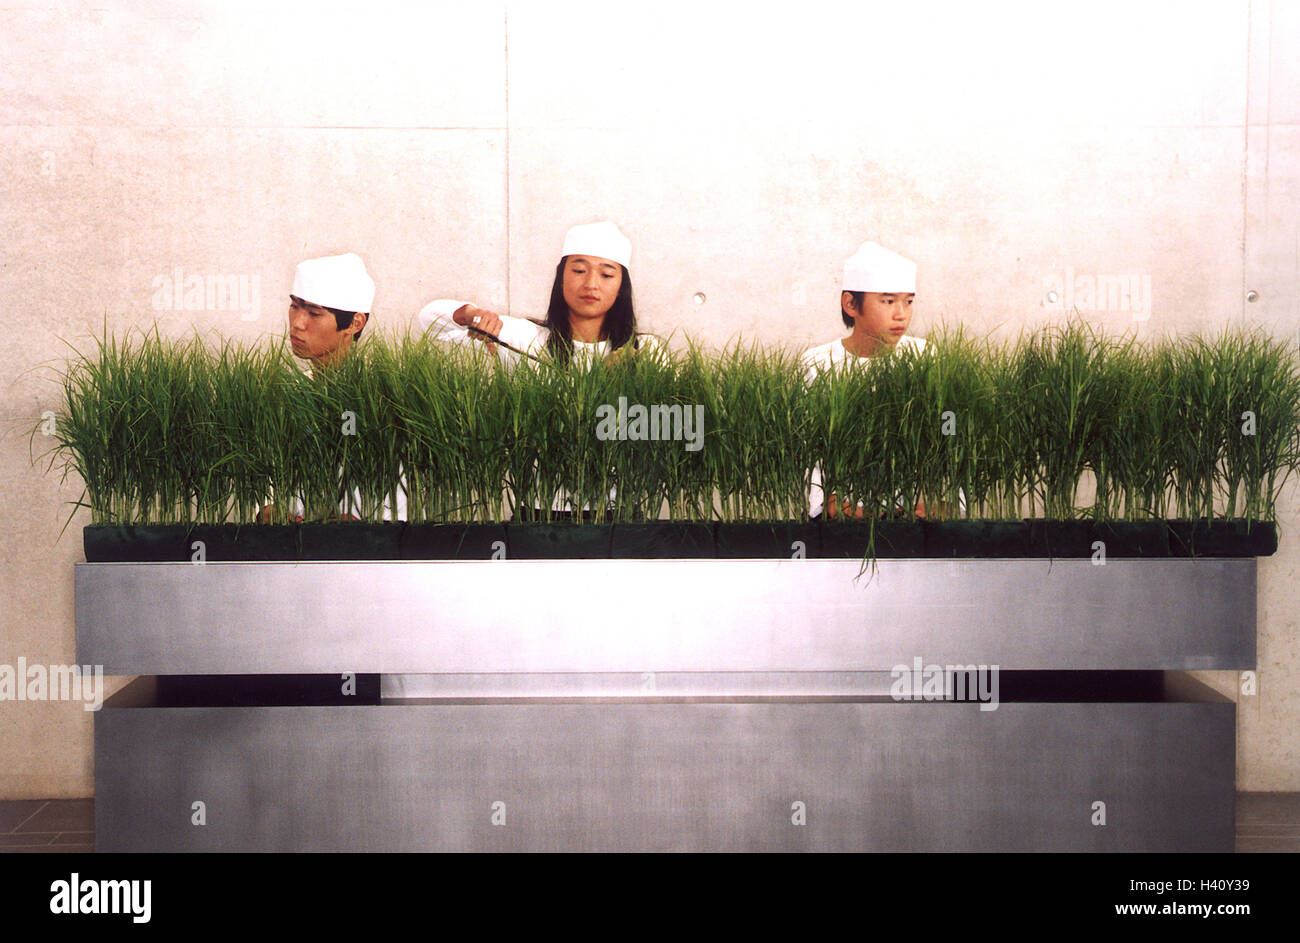 Asians, window box, grass, cut to size, Ti7, balcony cases, plants, plantation, cultivate, breeding, breed, maneuver, genetic engineering, genetic change, young persons, men, woman, young, three, caps, headgears, seriously, conscientiously, work, research Stock Photo